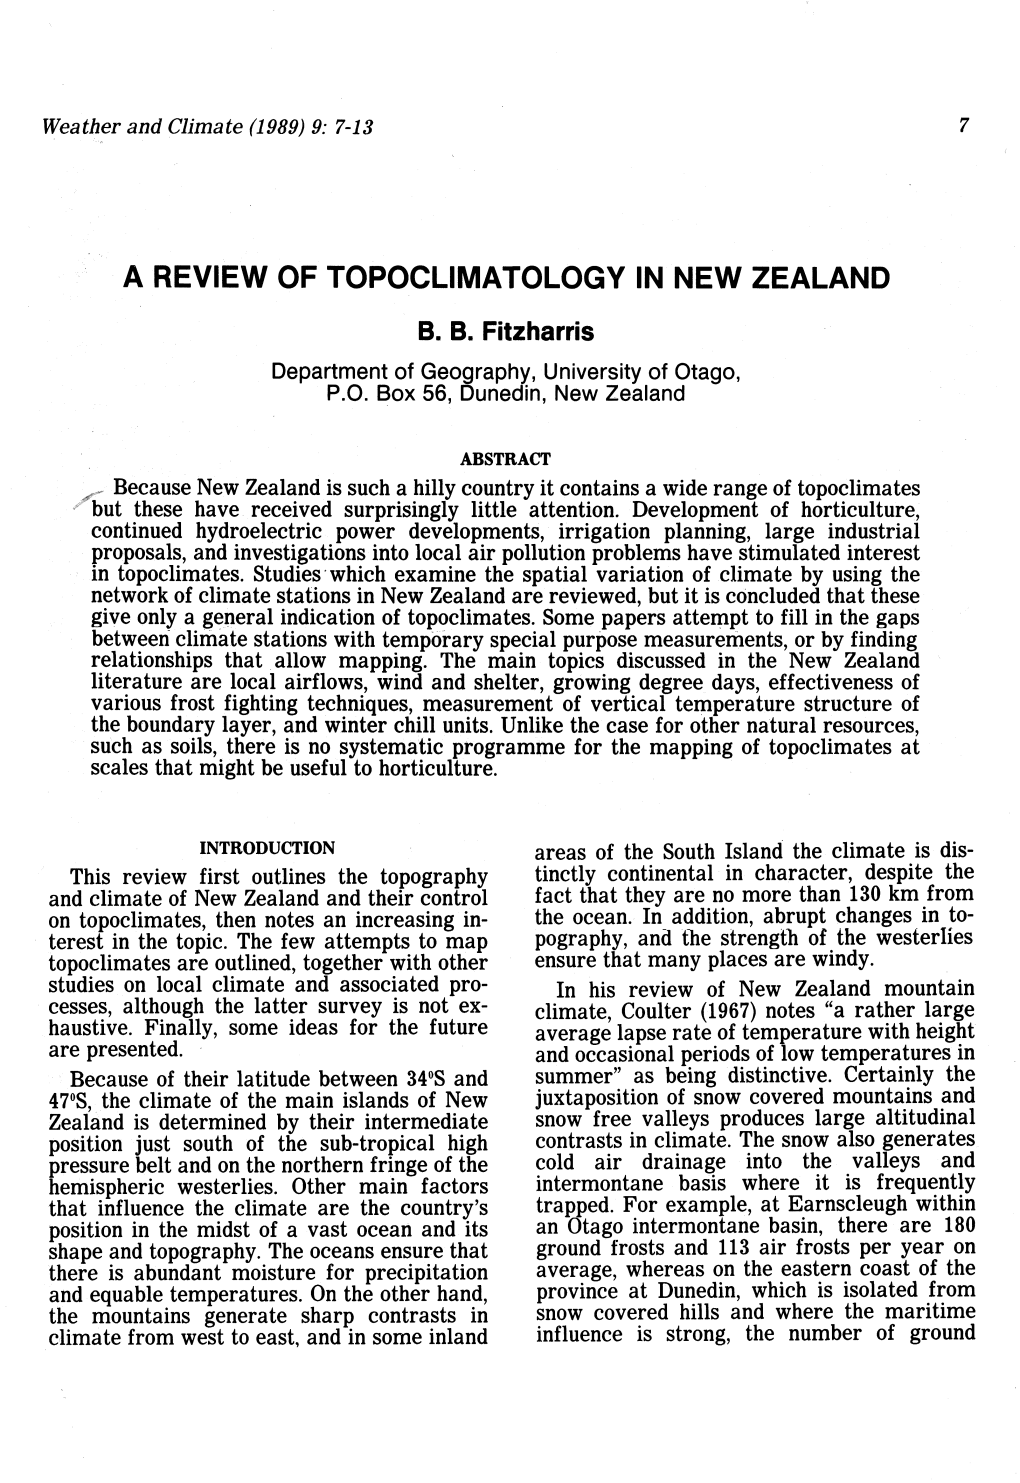 A Review of Topoclimatology in New Zealand